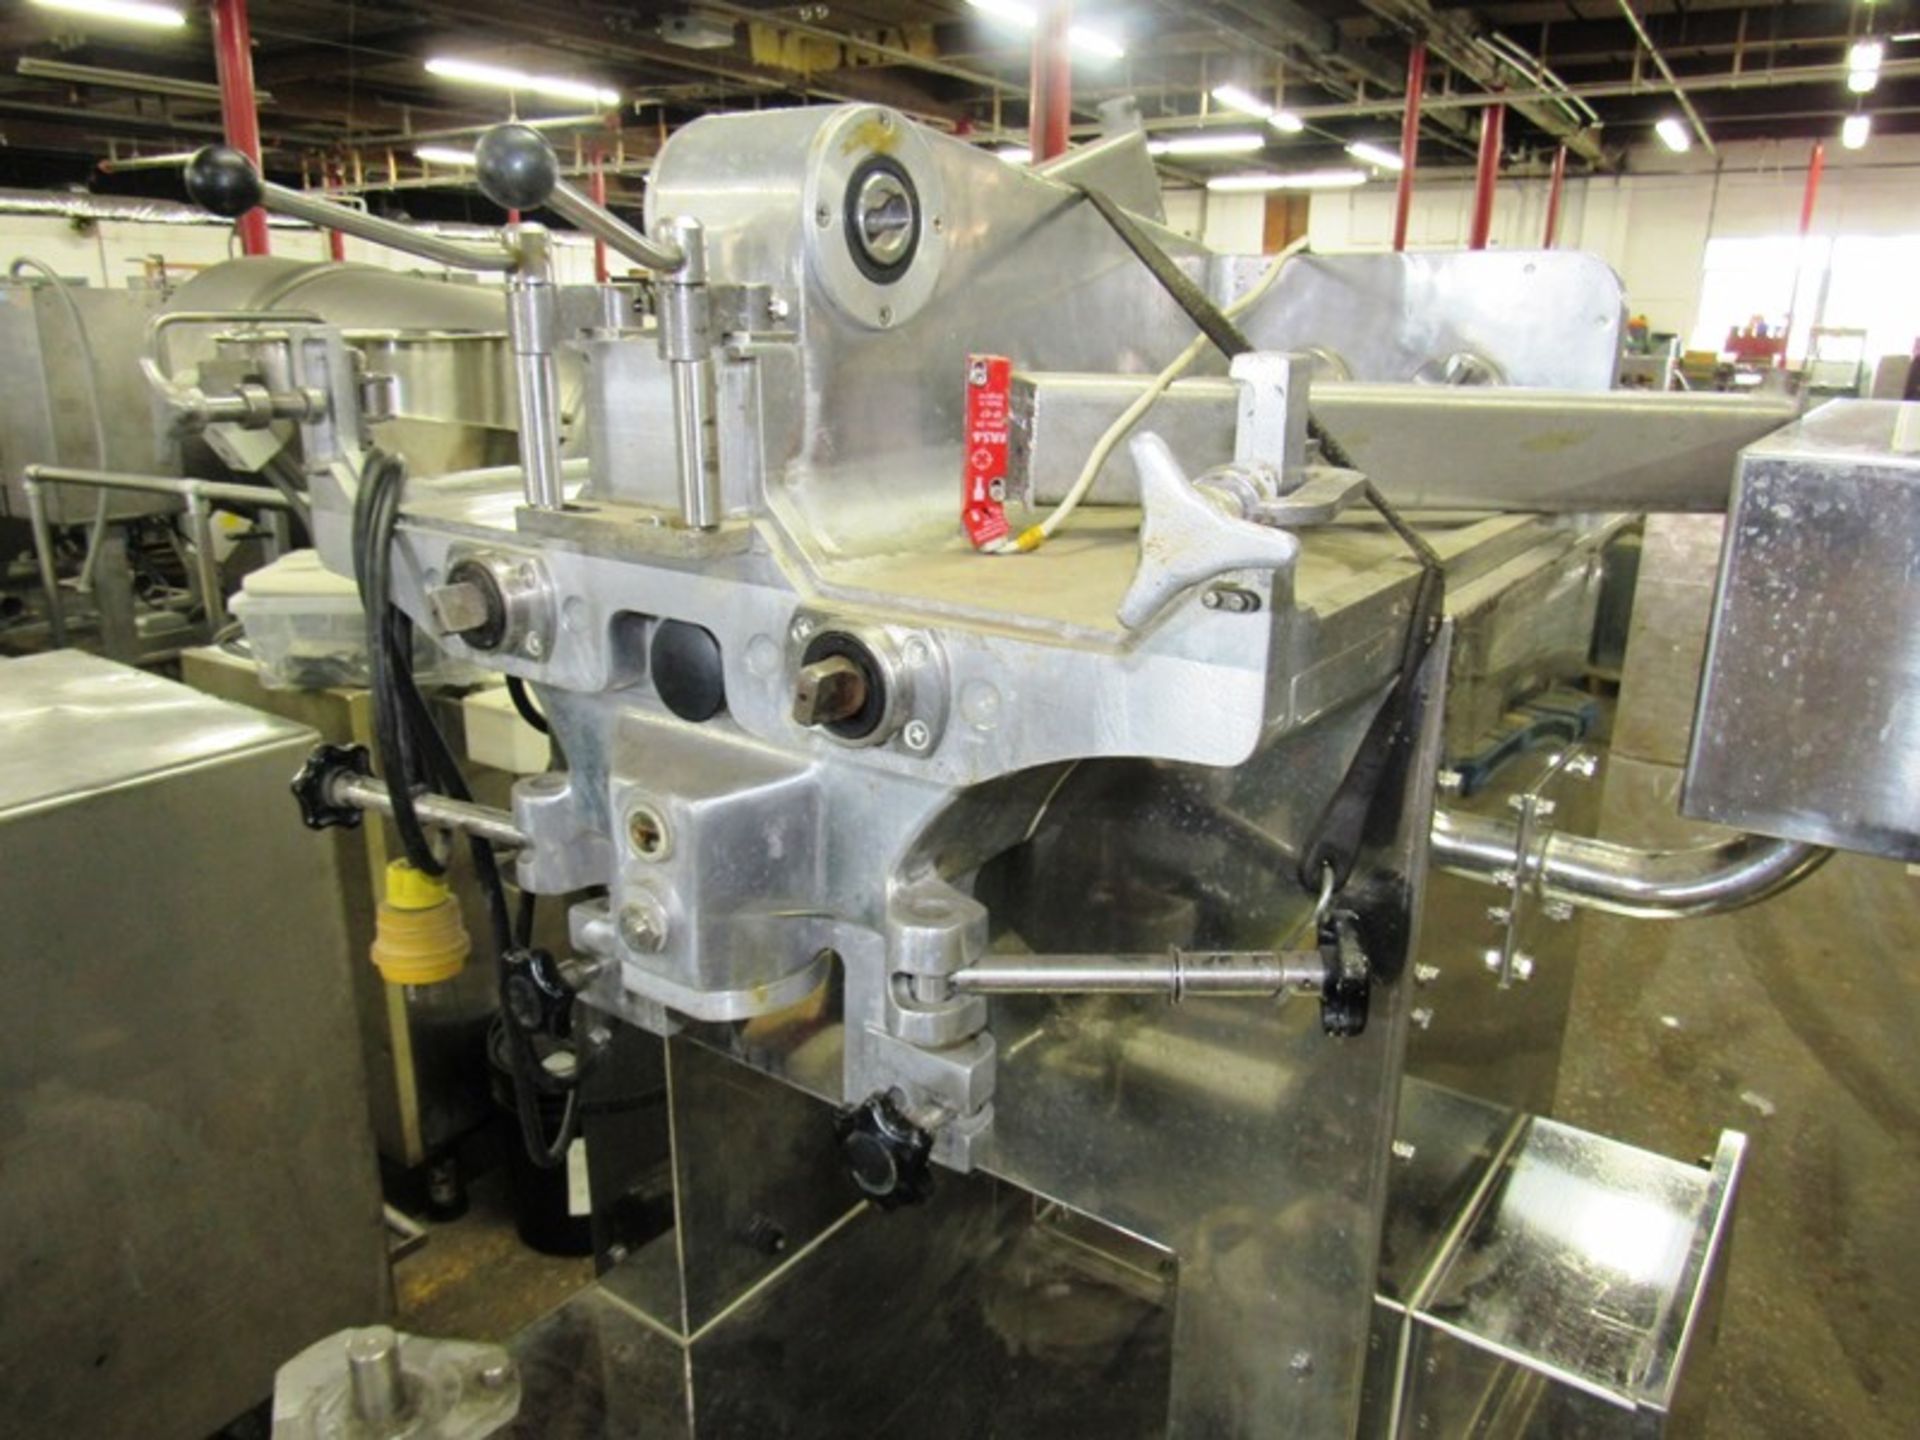 Rheon Mdl. KN300 Cornucopia Encrusting Machine, 220 volts, 3 phase - ***All Monies must be received - Image 3 of 7